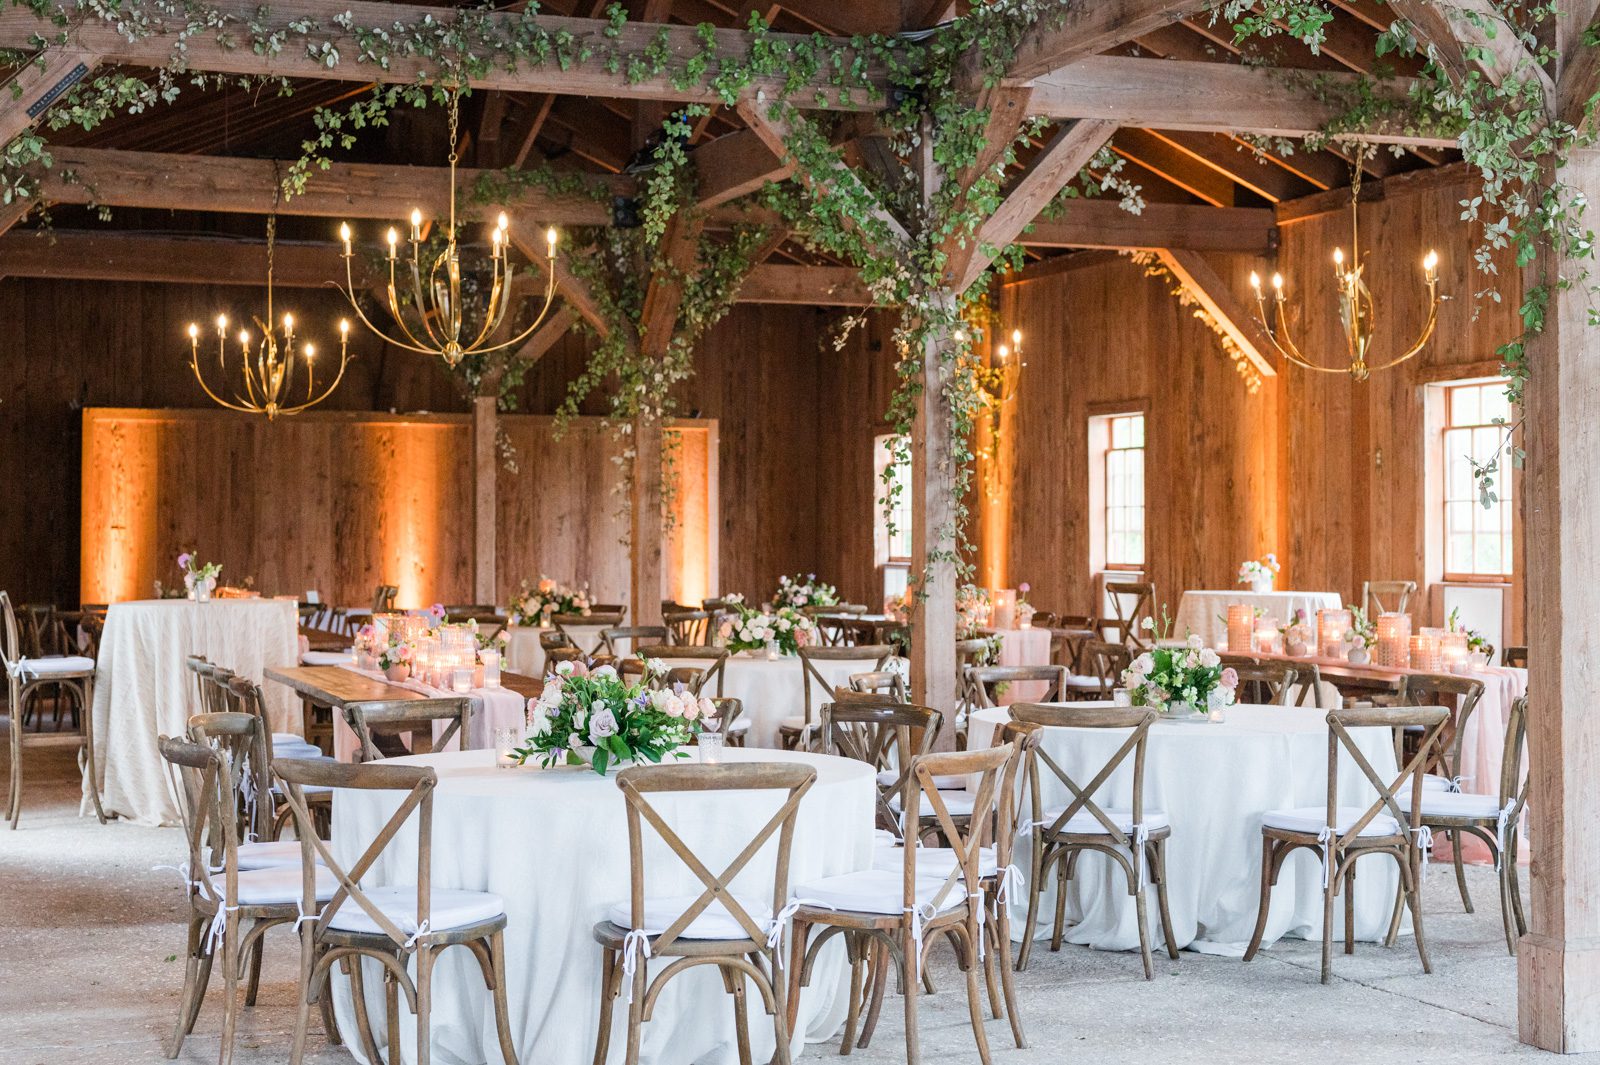 Interior of Boone Hall Cotton Dock decorated for wedding